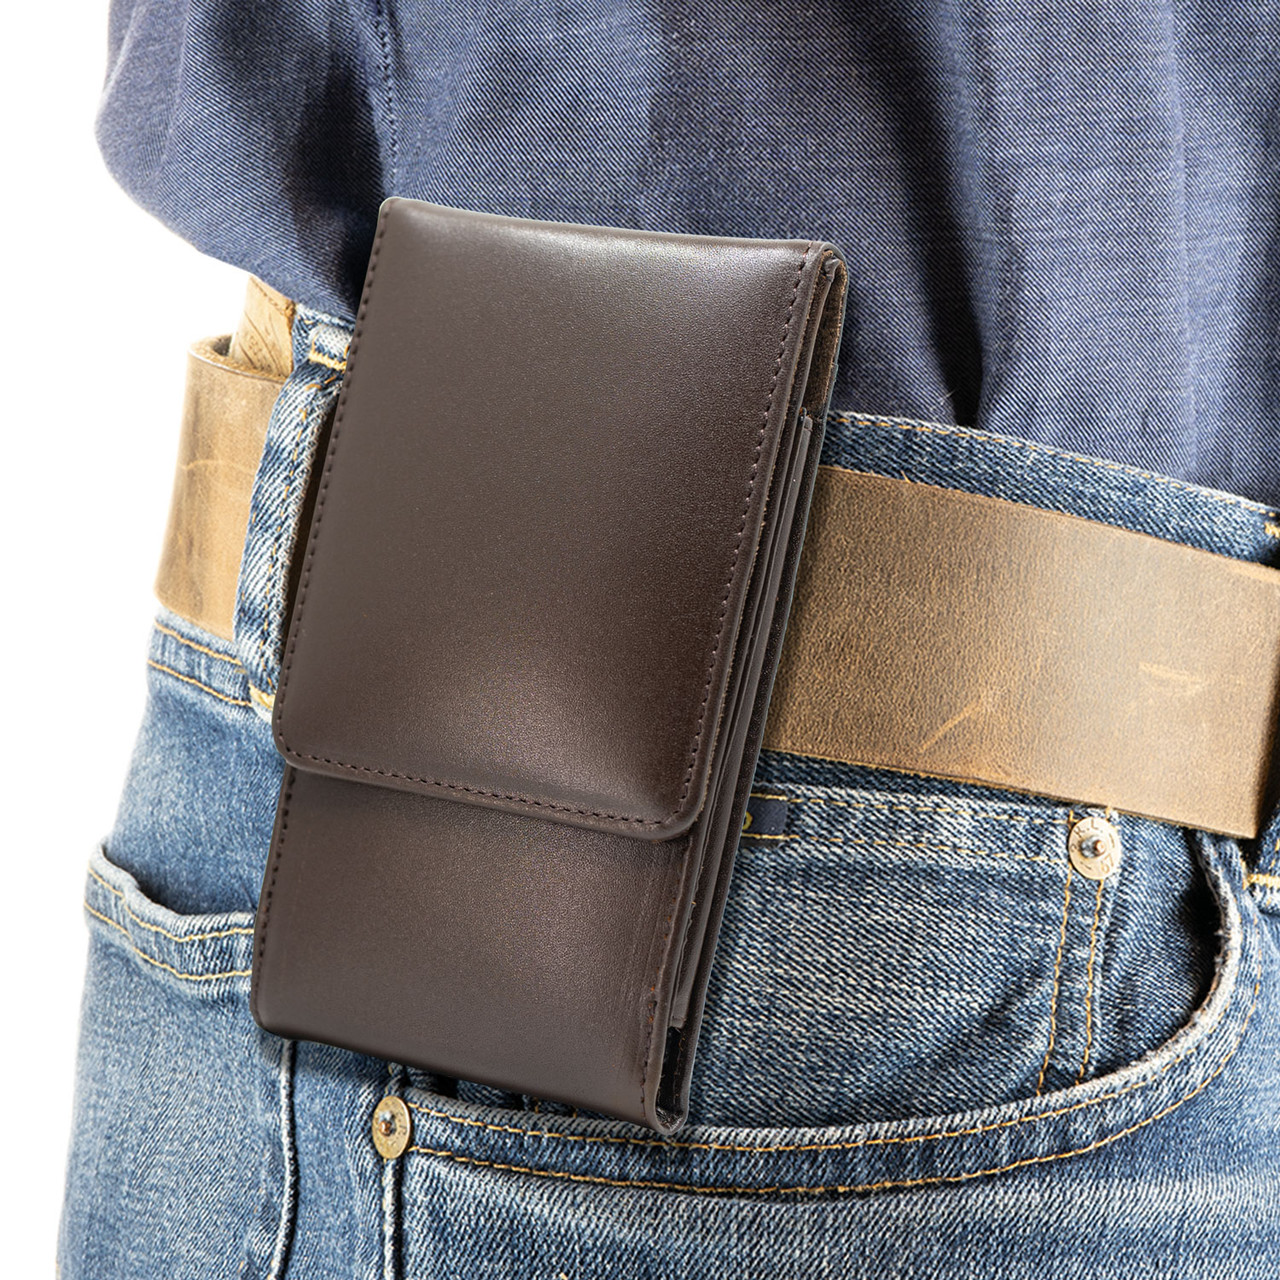 Brown Leather Cell Phone Case - Sneaky Pete Holsters, Inc.